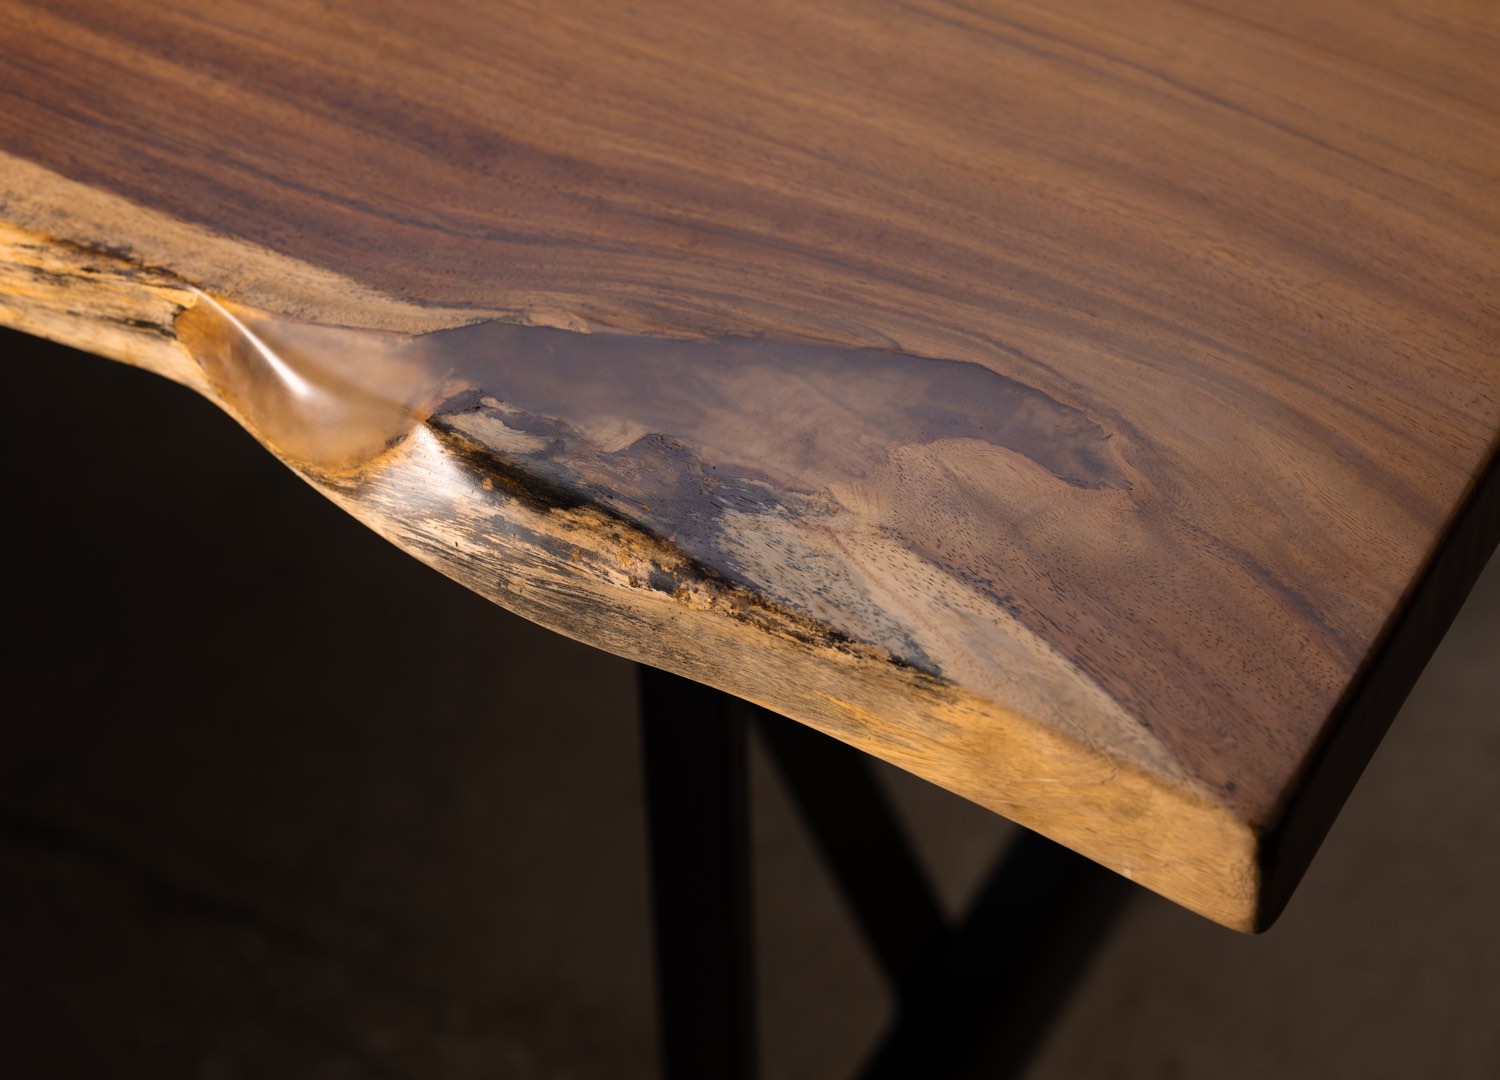 Sierra Conference Table